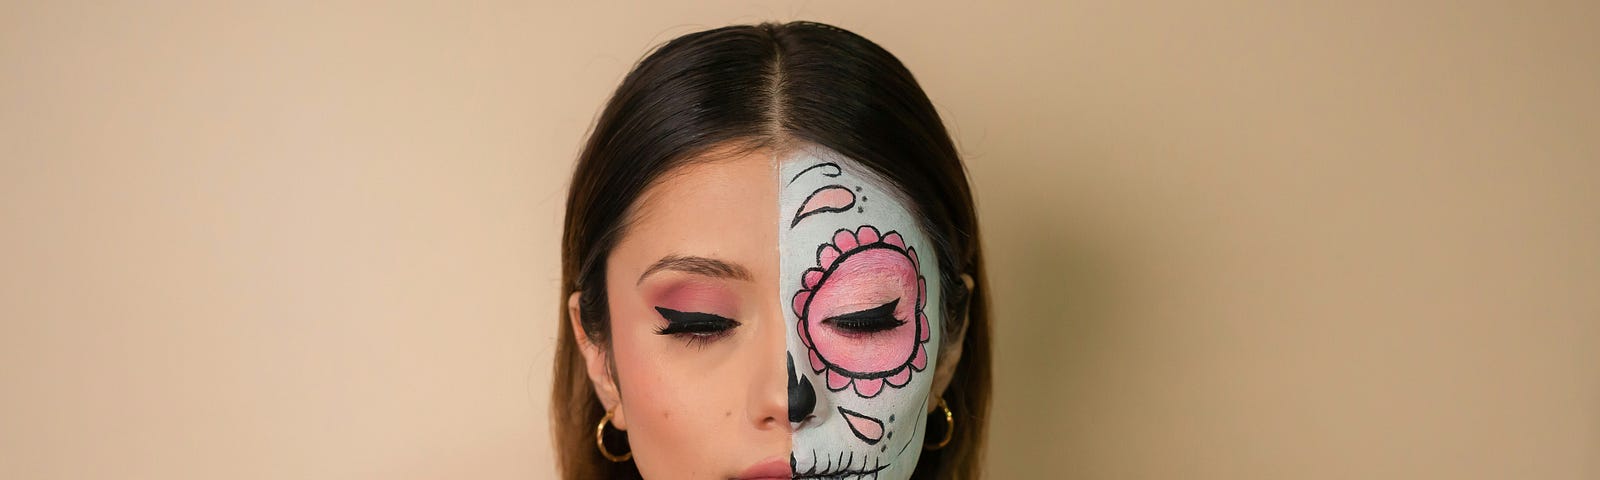 Woman with half painted skeleton face